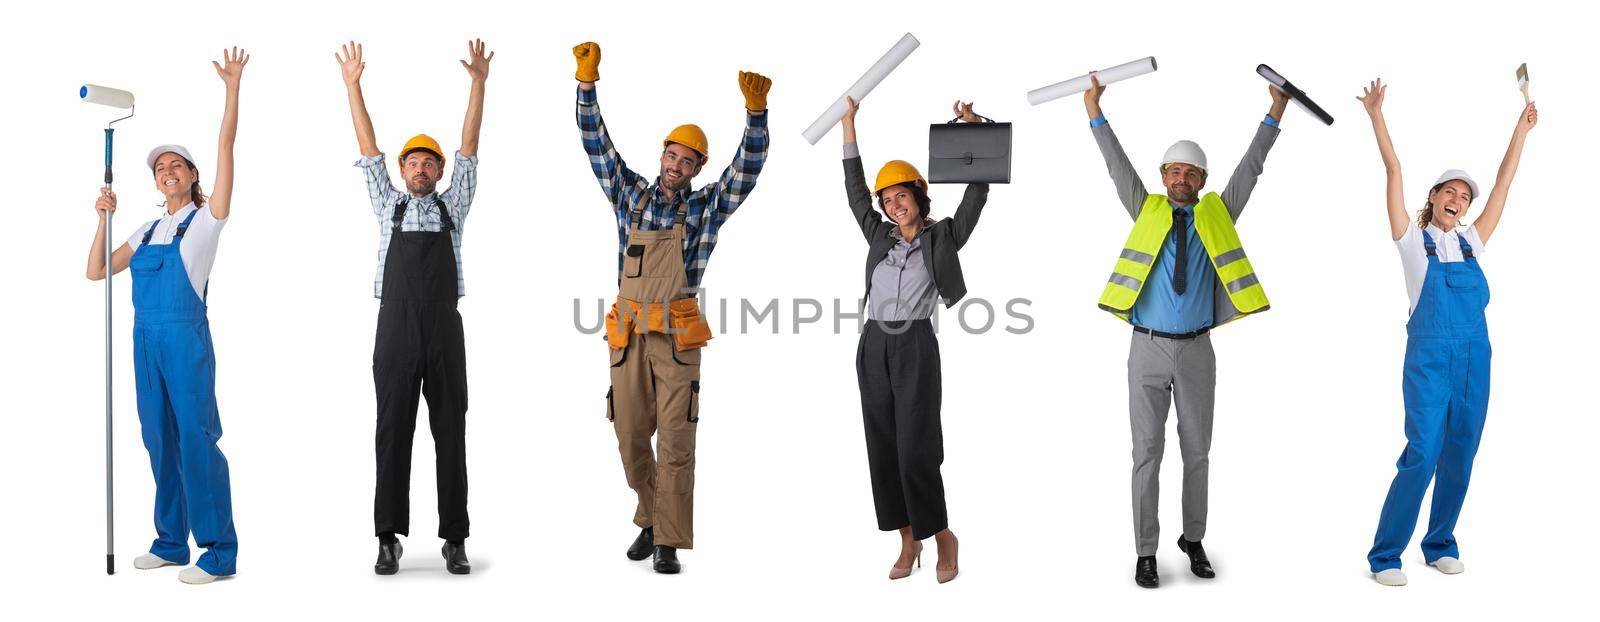 Happy construction workers by ALotOfPeople